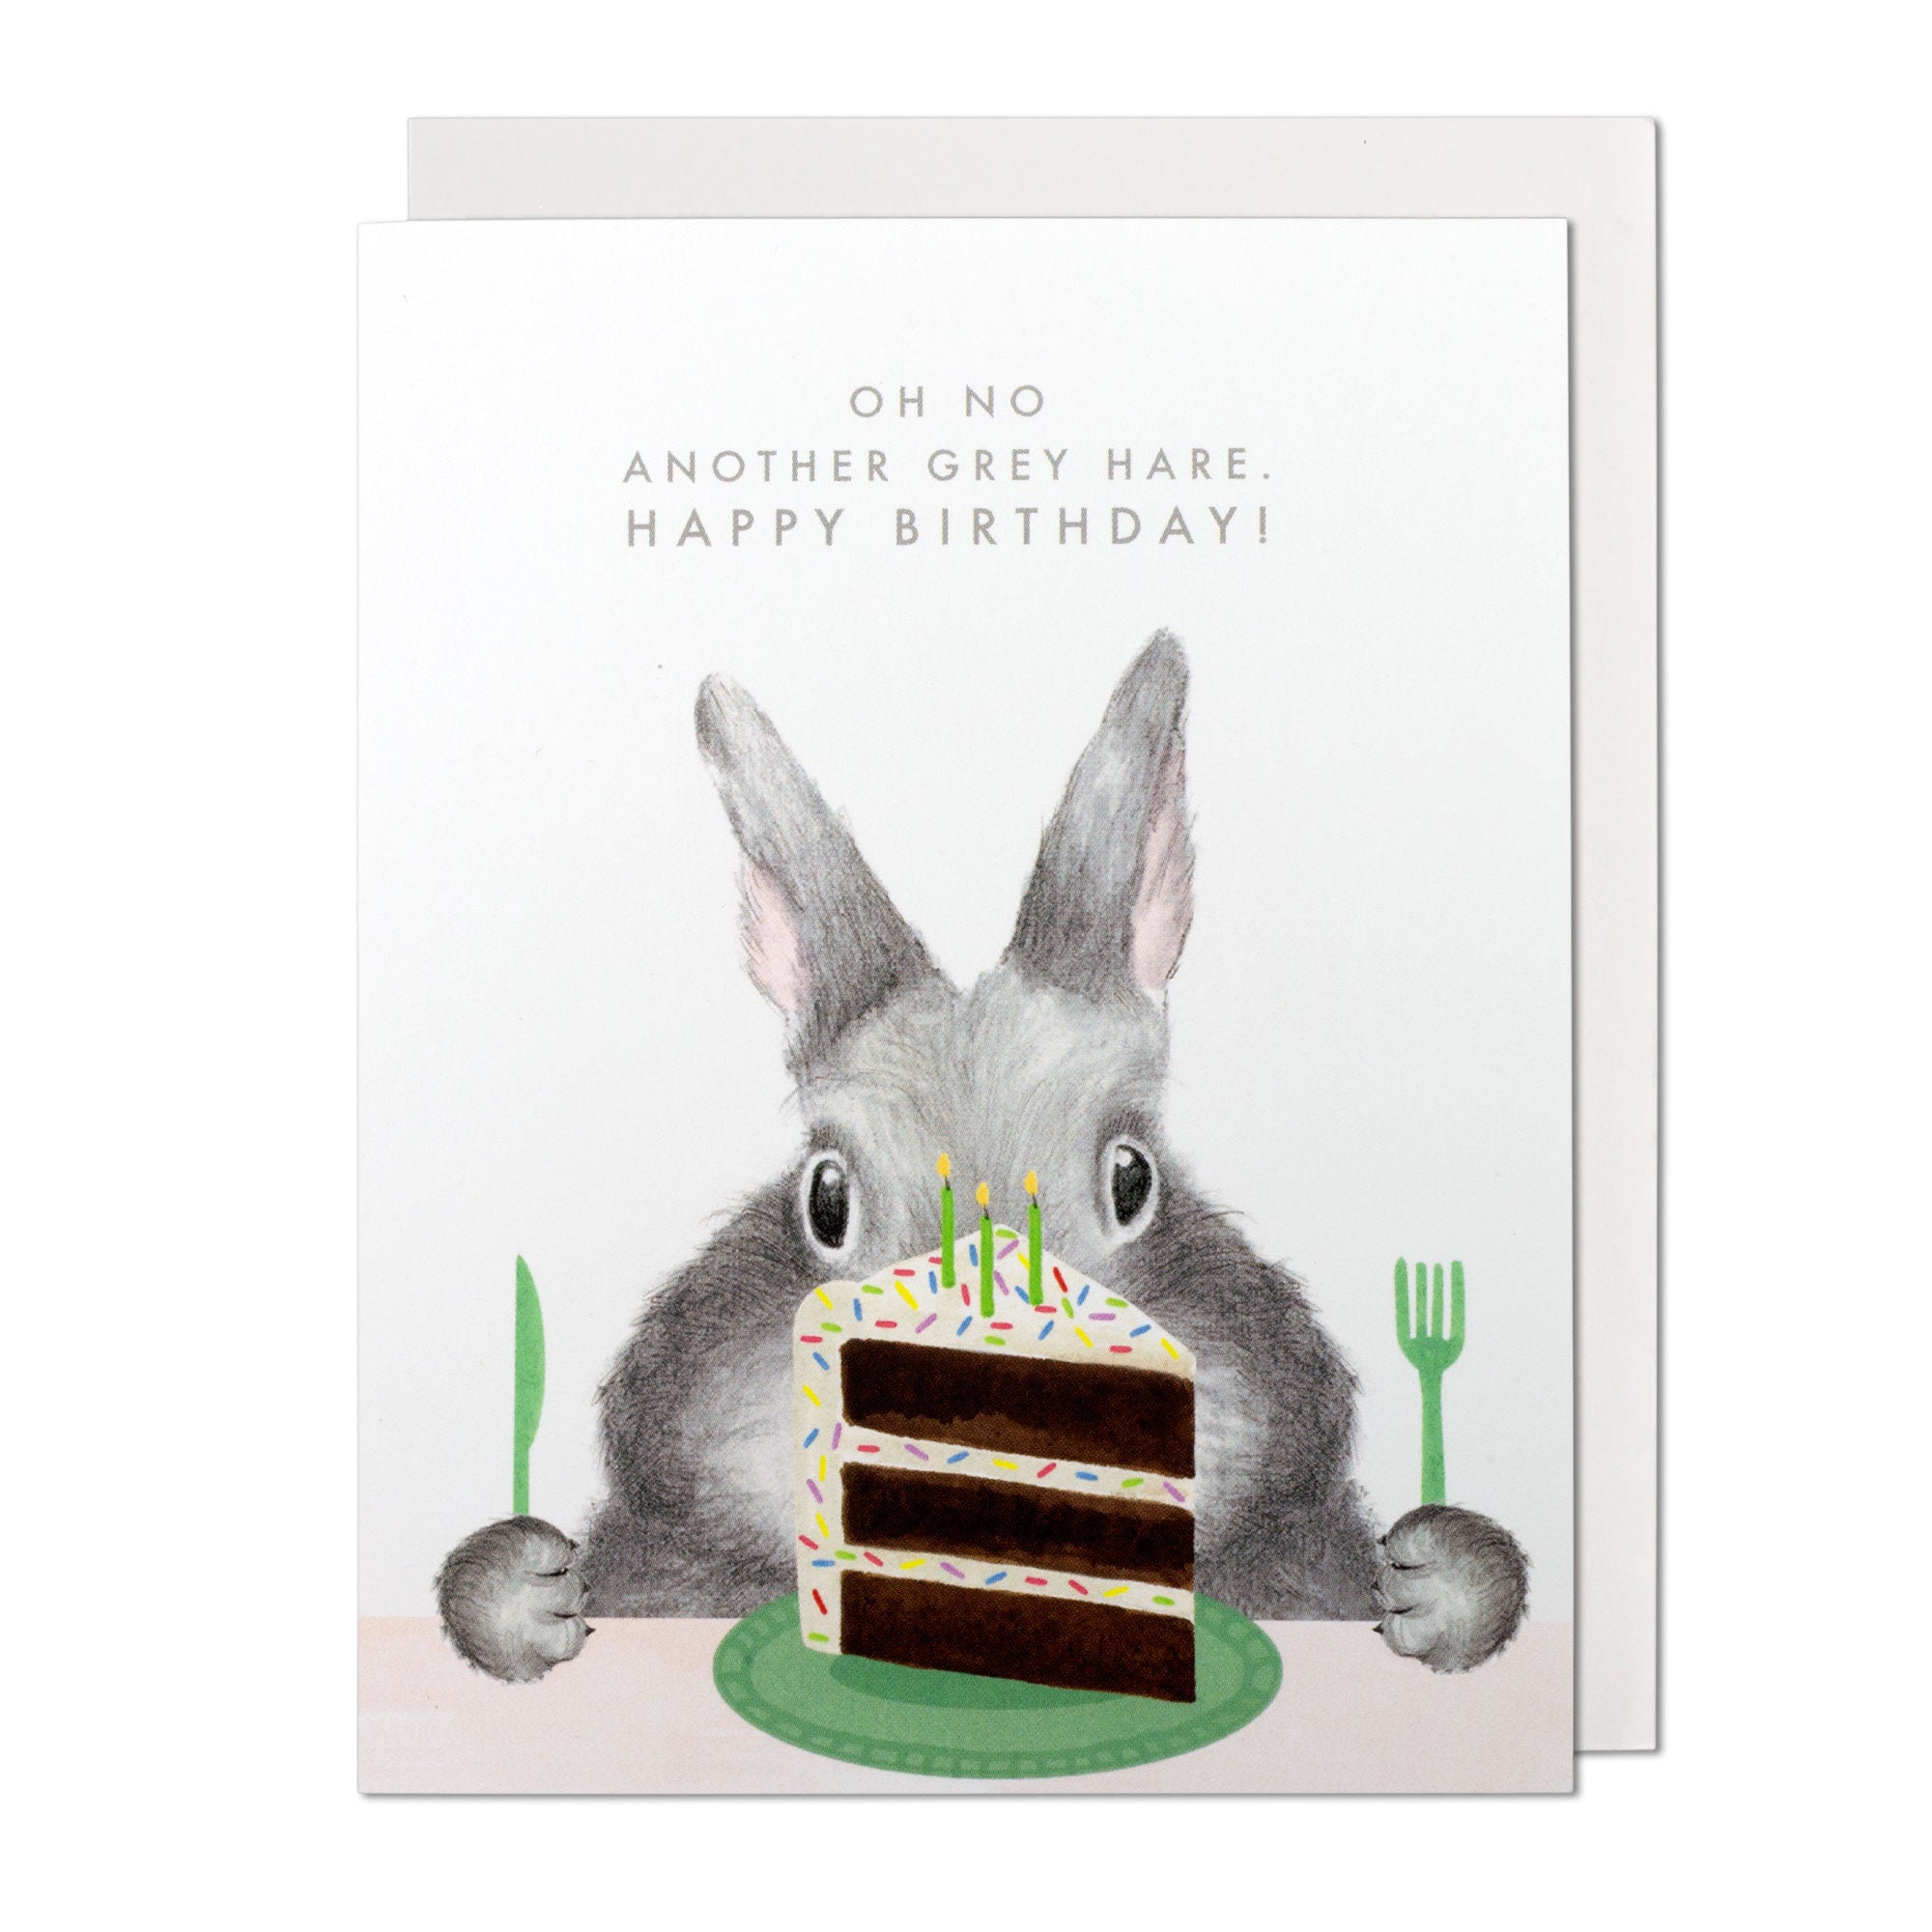 Another Grey Hare Greeting Card